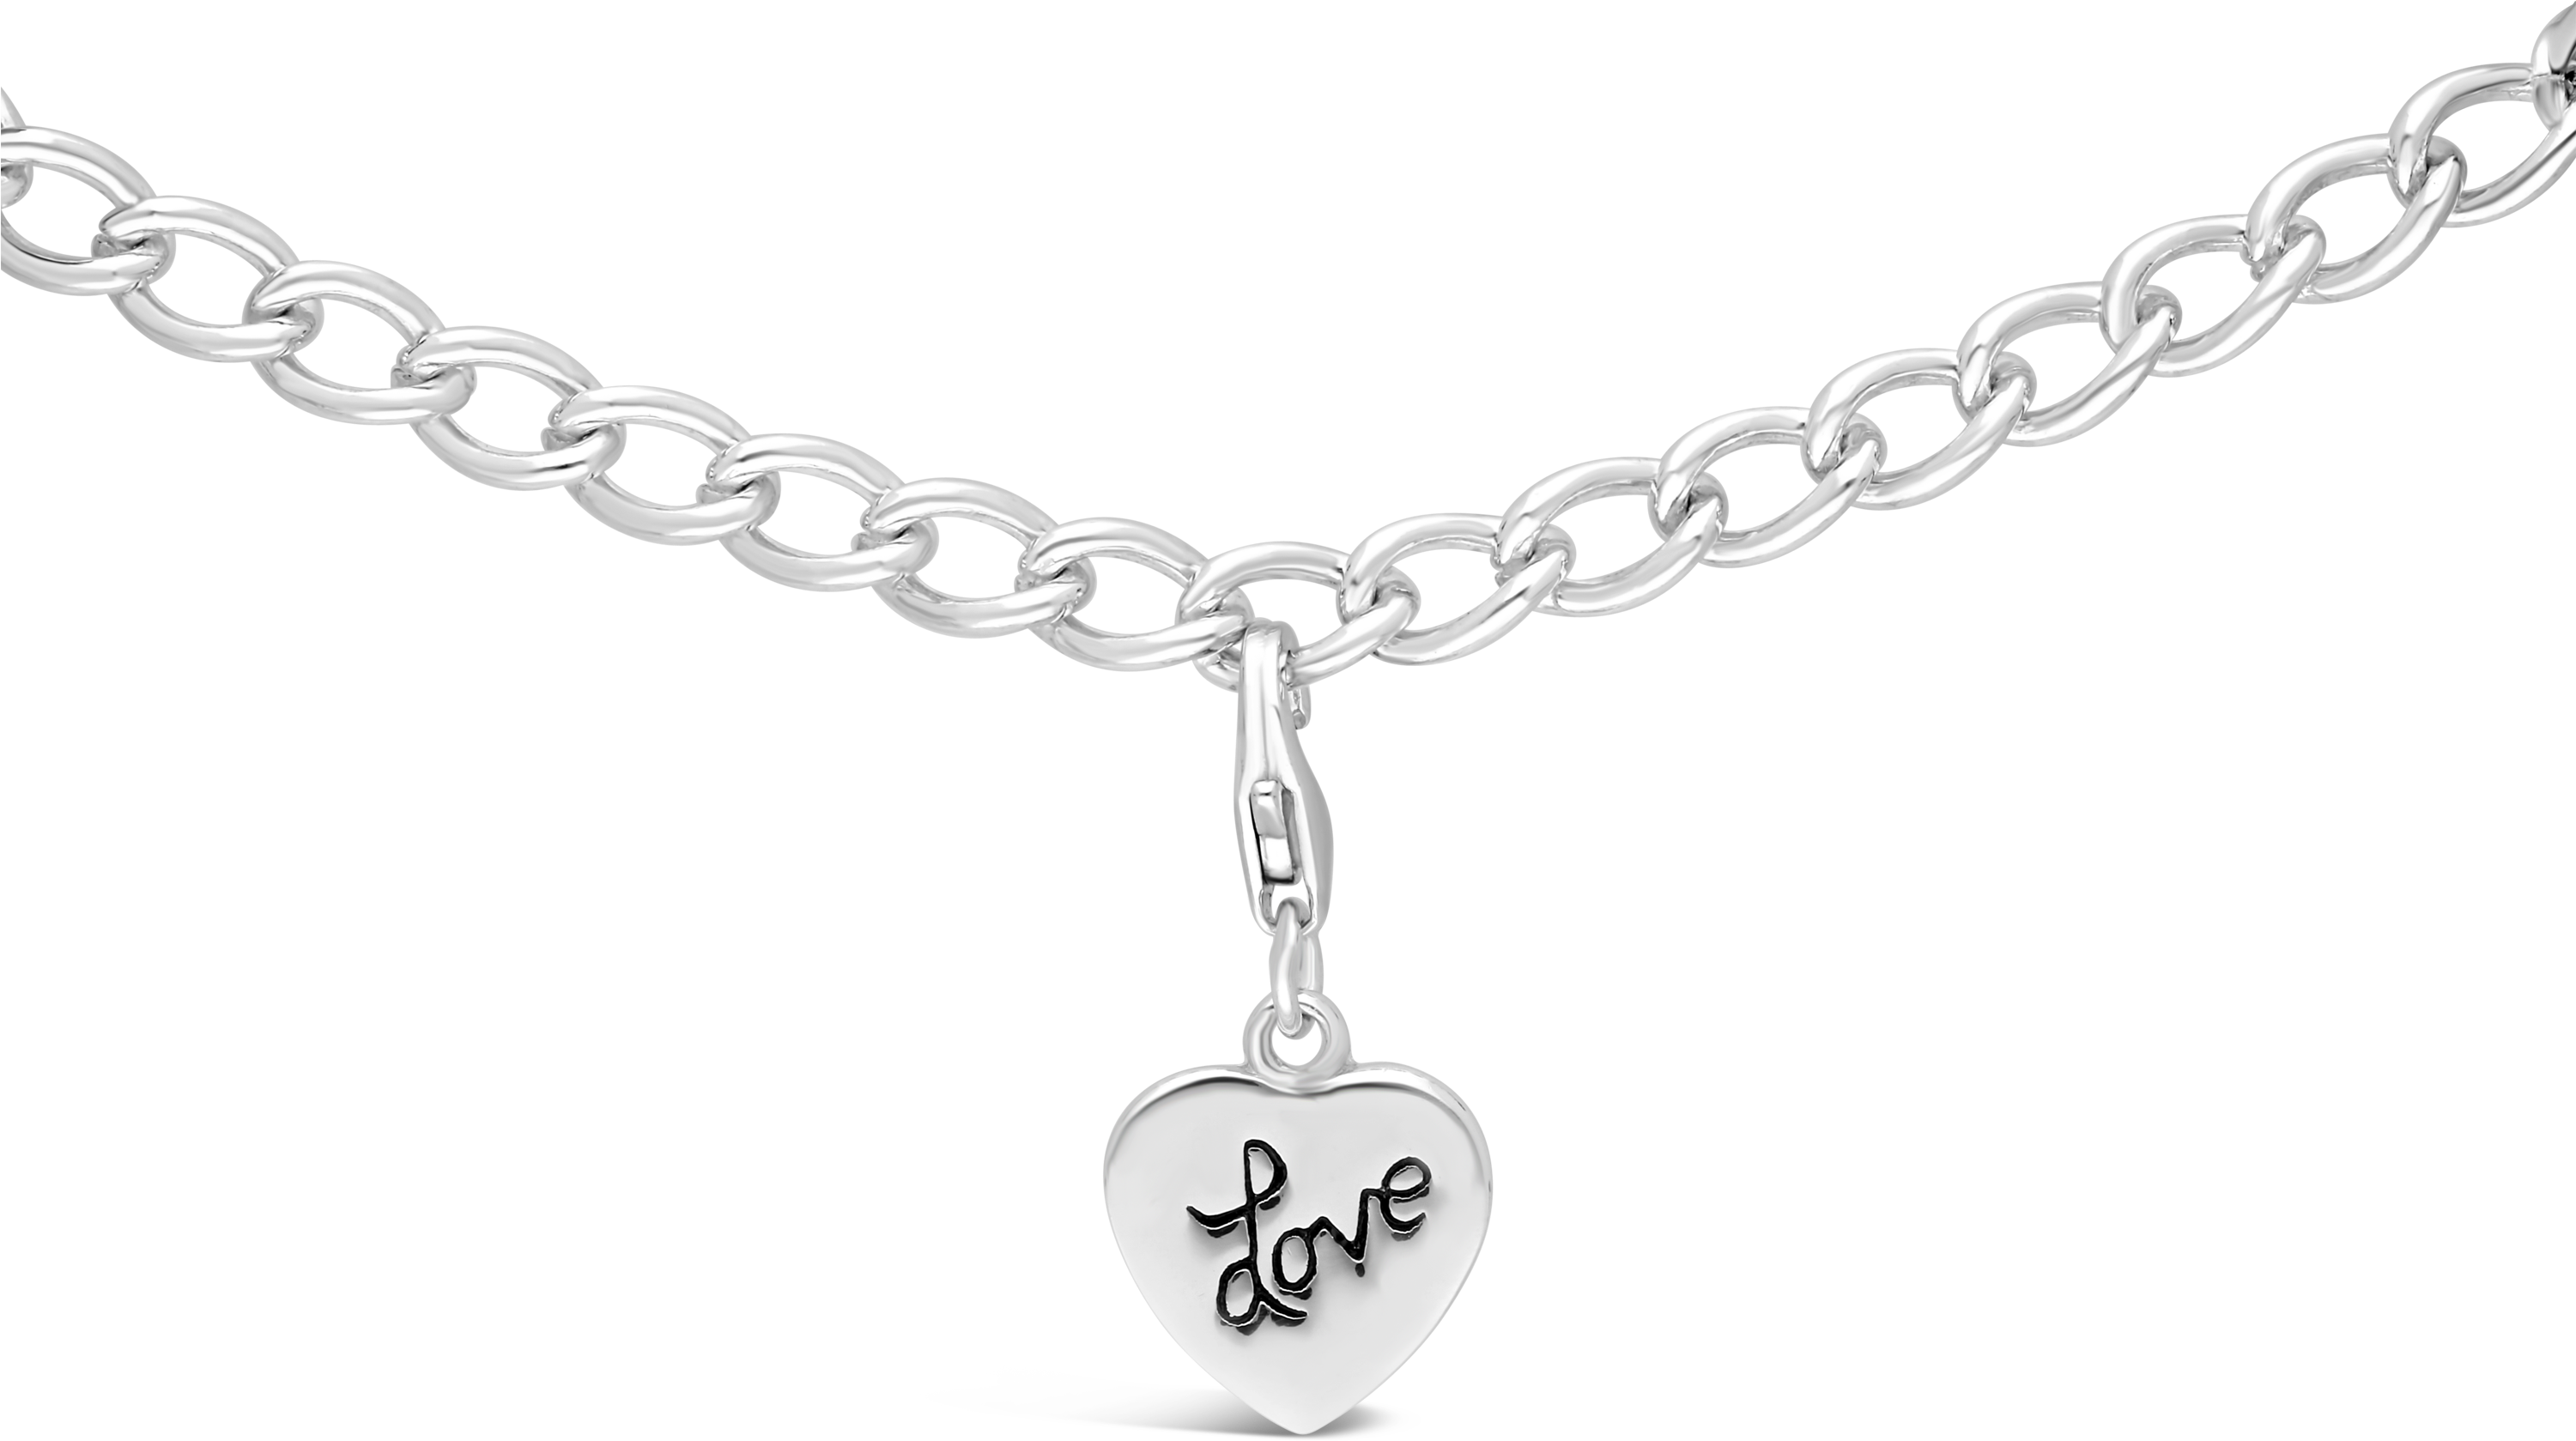 Download 3000 X 3000 3 Locket Png Image With No Background Pngkey Com